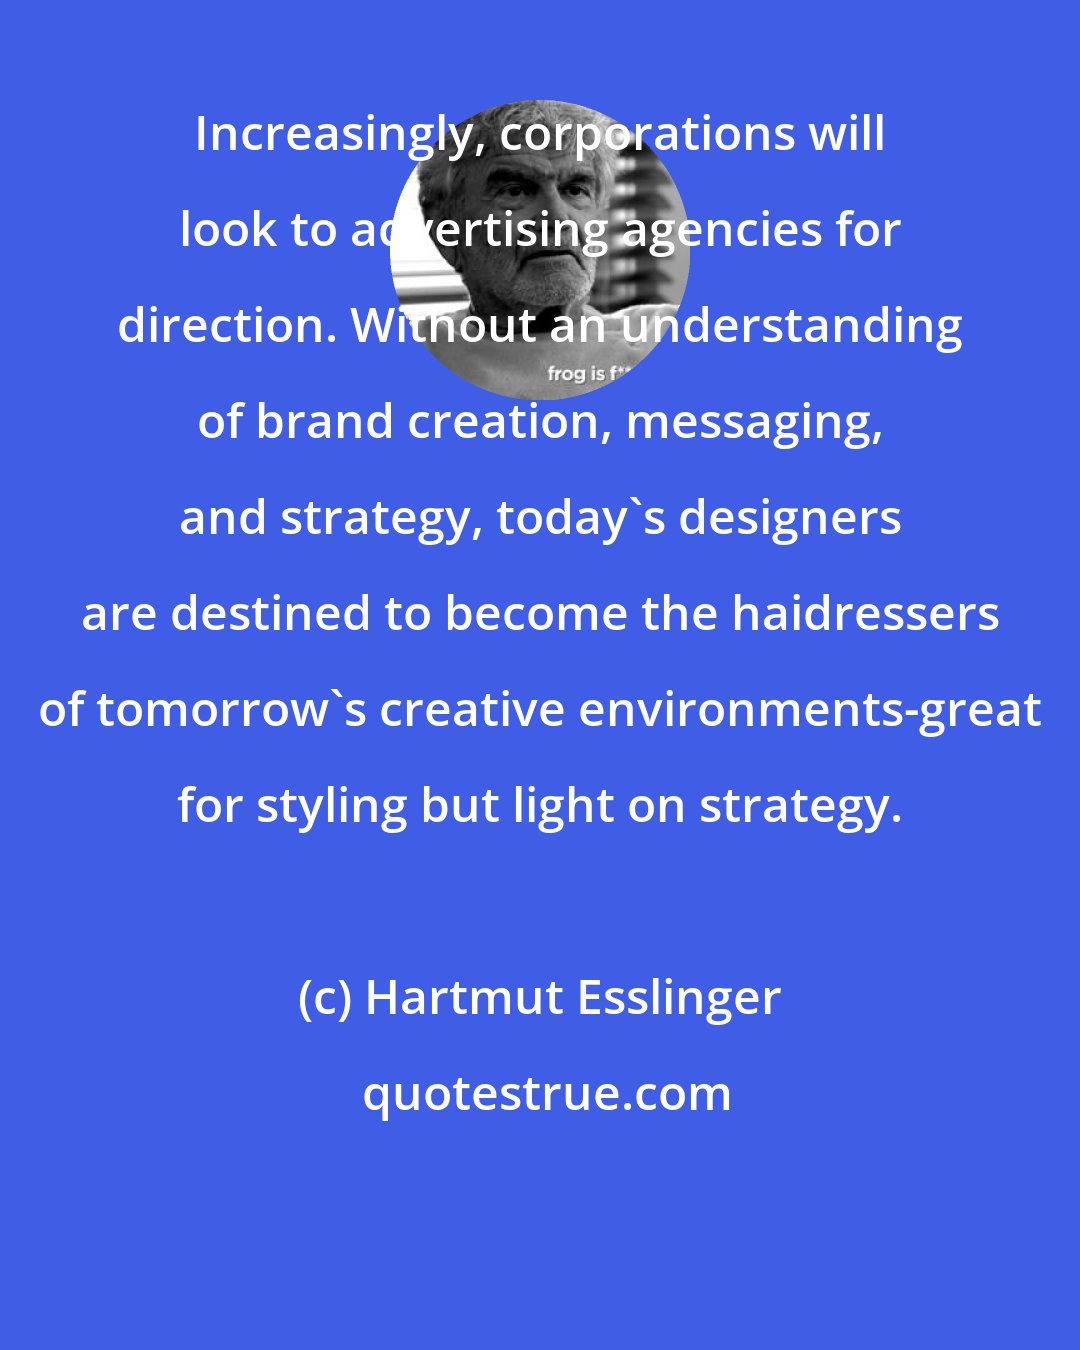 Hartmut Esslinger: Increasingly, corporations will look to advertising agencies for direction. Without an understanding of brand creation, messaging, and strategy, today's designers are destined to become the haidressers of tomorrow's creative environments-great for styling but light on strategy.